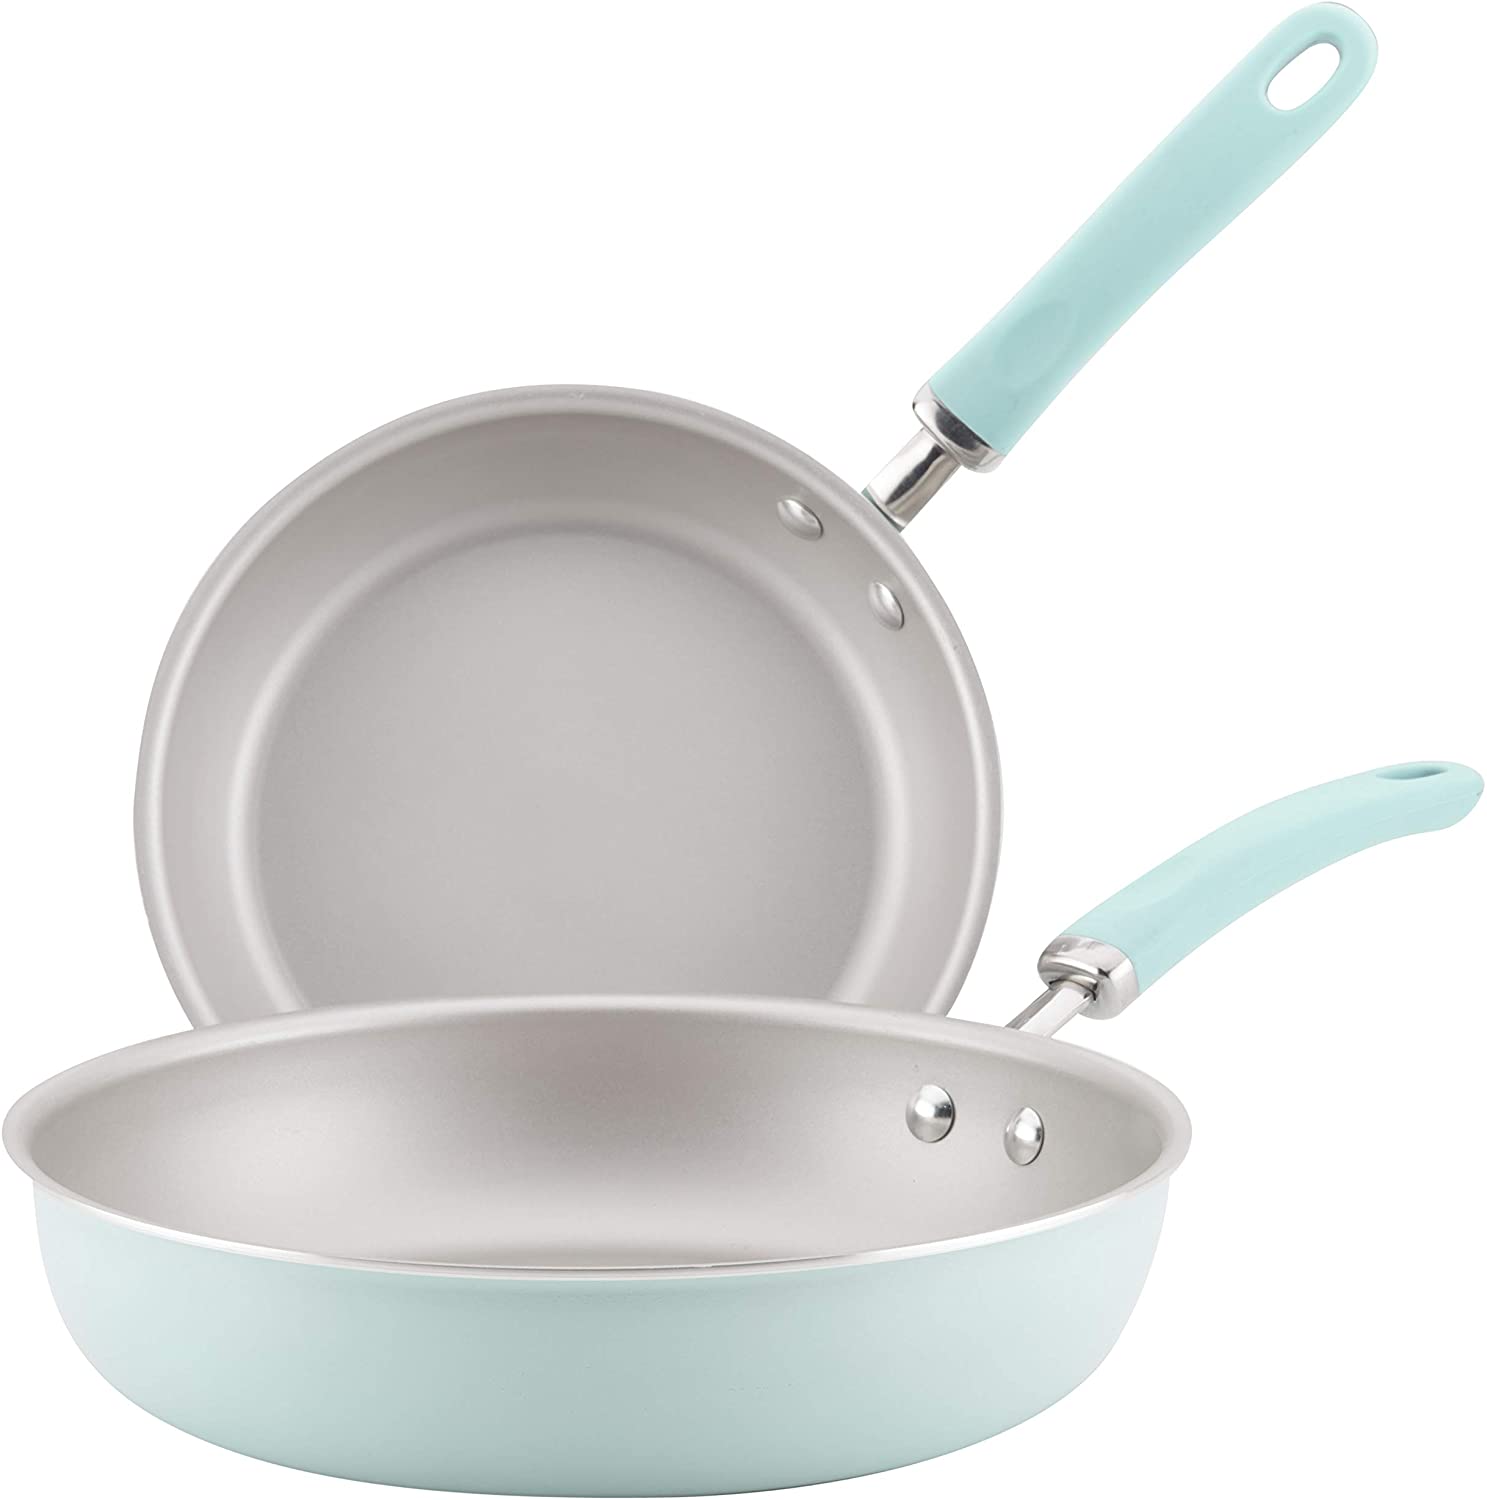 Rachael Ray Create Delicious Hard Anodized Nonstick Cookware Pots and -  Loft410